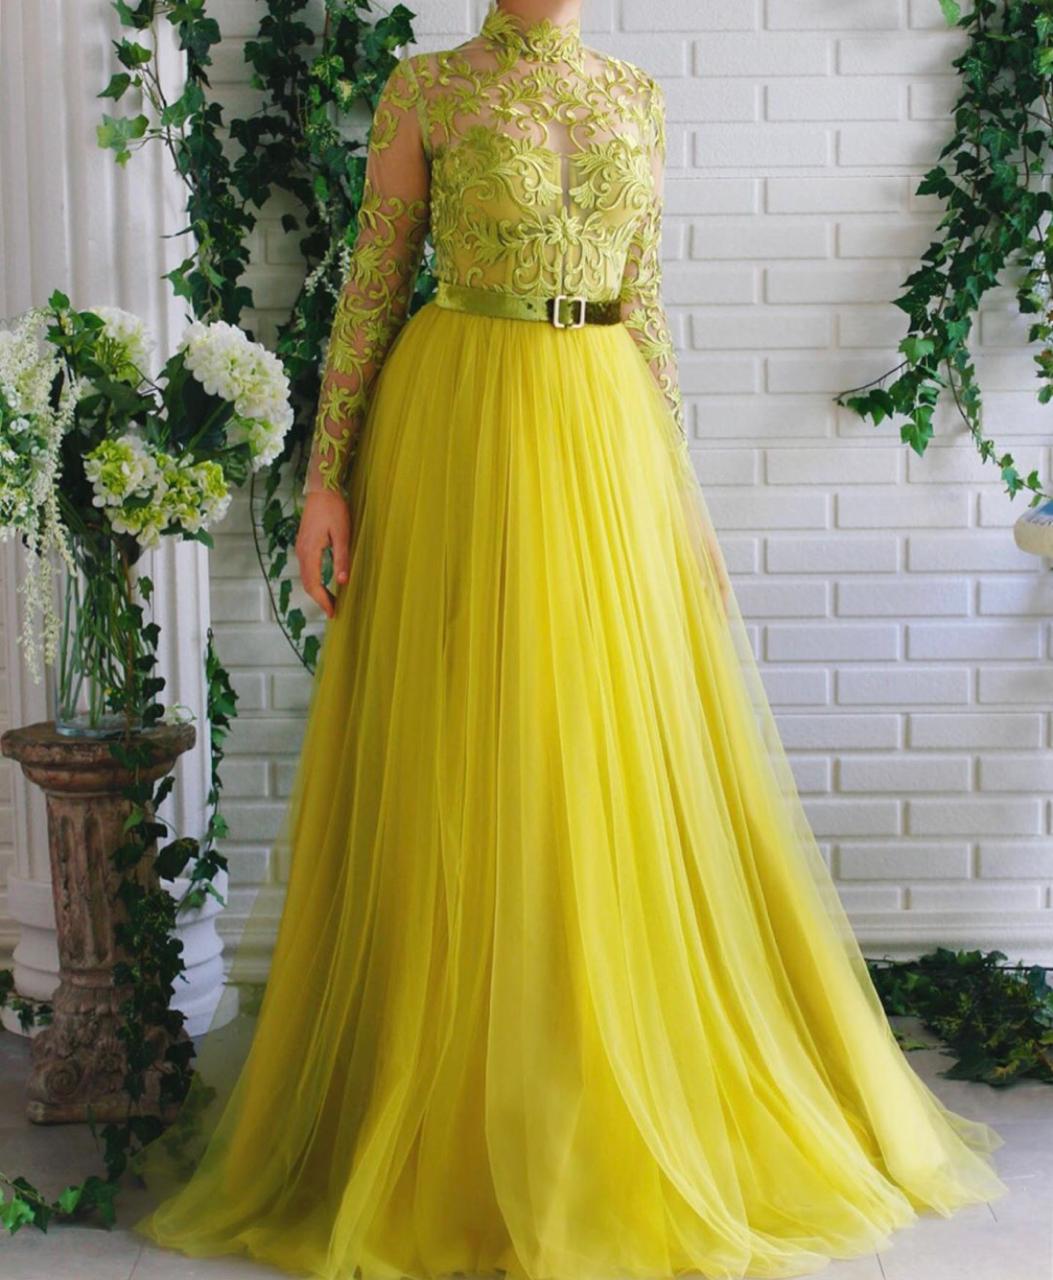 Yellow A-Line dress with belt, embroidery and long sleeves